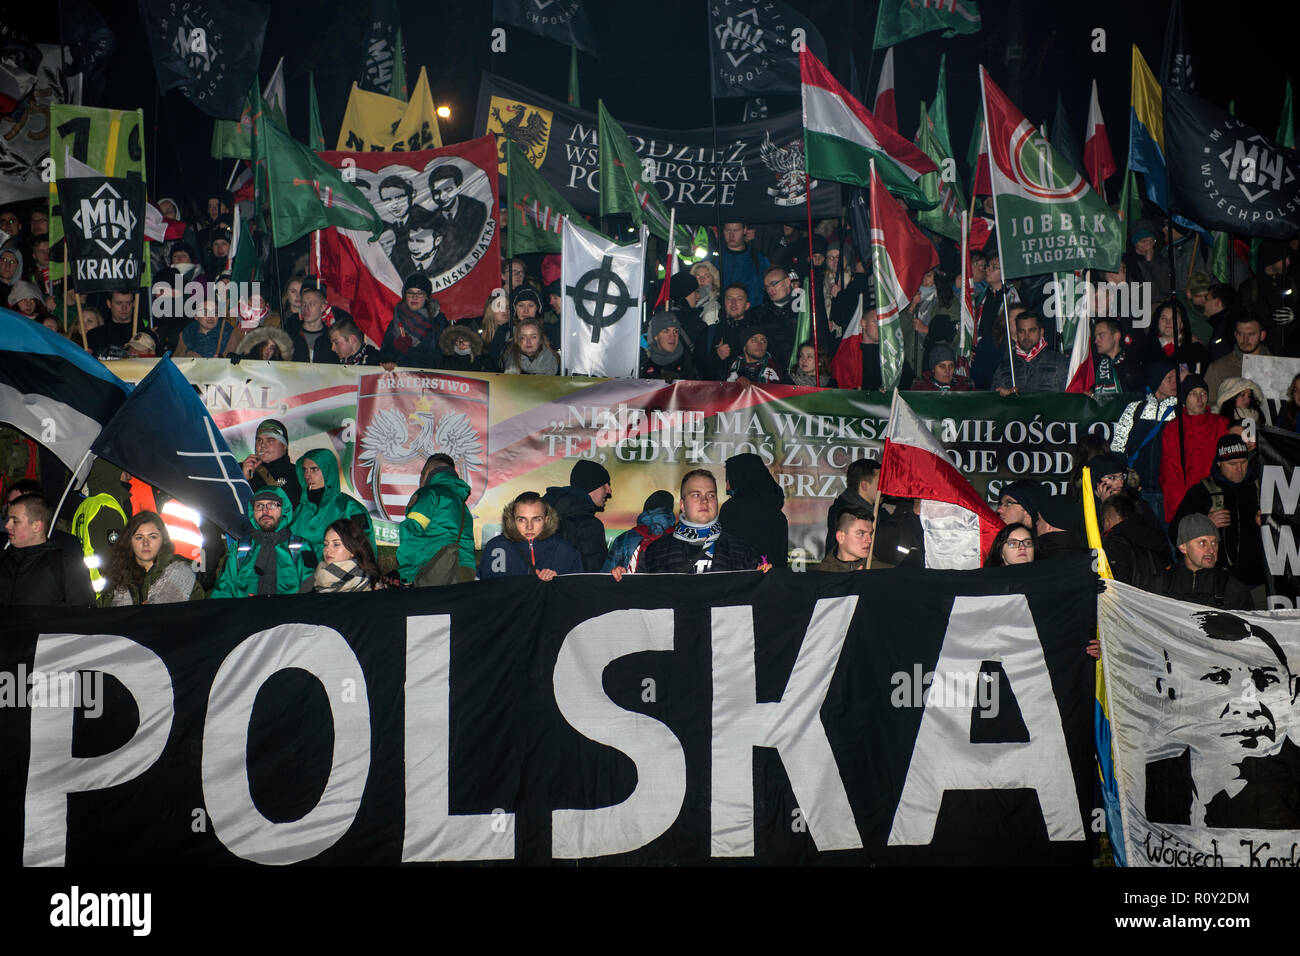 Polish and Hungarian nationalists seen with the White Power placard on the Independence Day during the protest. Last year about 60,000 people took part in the nationalist march marking Poland’s Independence Day, according to police figures. The march has taken place each year on November 11th for almost a decade, and has grown to draw tens of thousands of participants, including extremists from across the EU. Warsaw’s mayor Hanna Gronkiewicz-Waltz has banned the event. Organizers said they would appeal against the decision, insisting they would go ahead with the march anyway and raising the pr Stock Photo